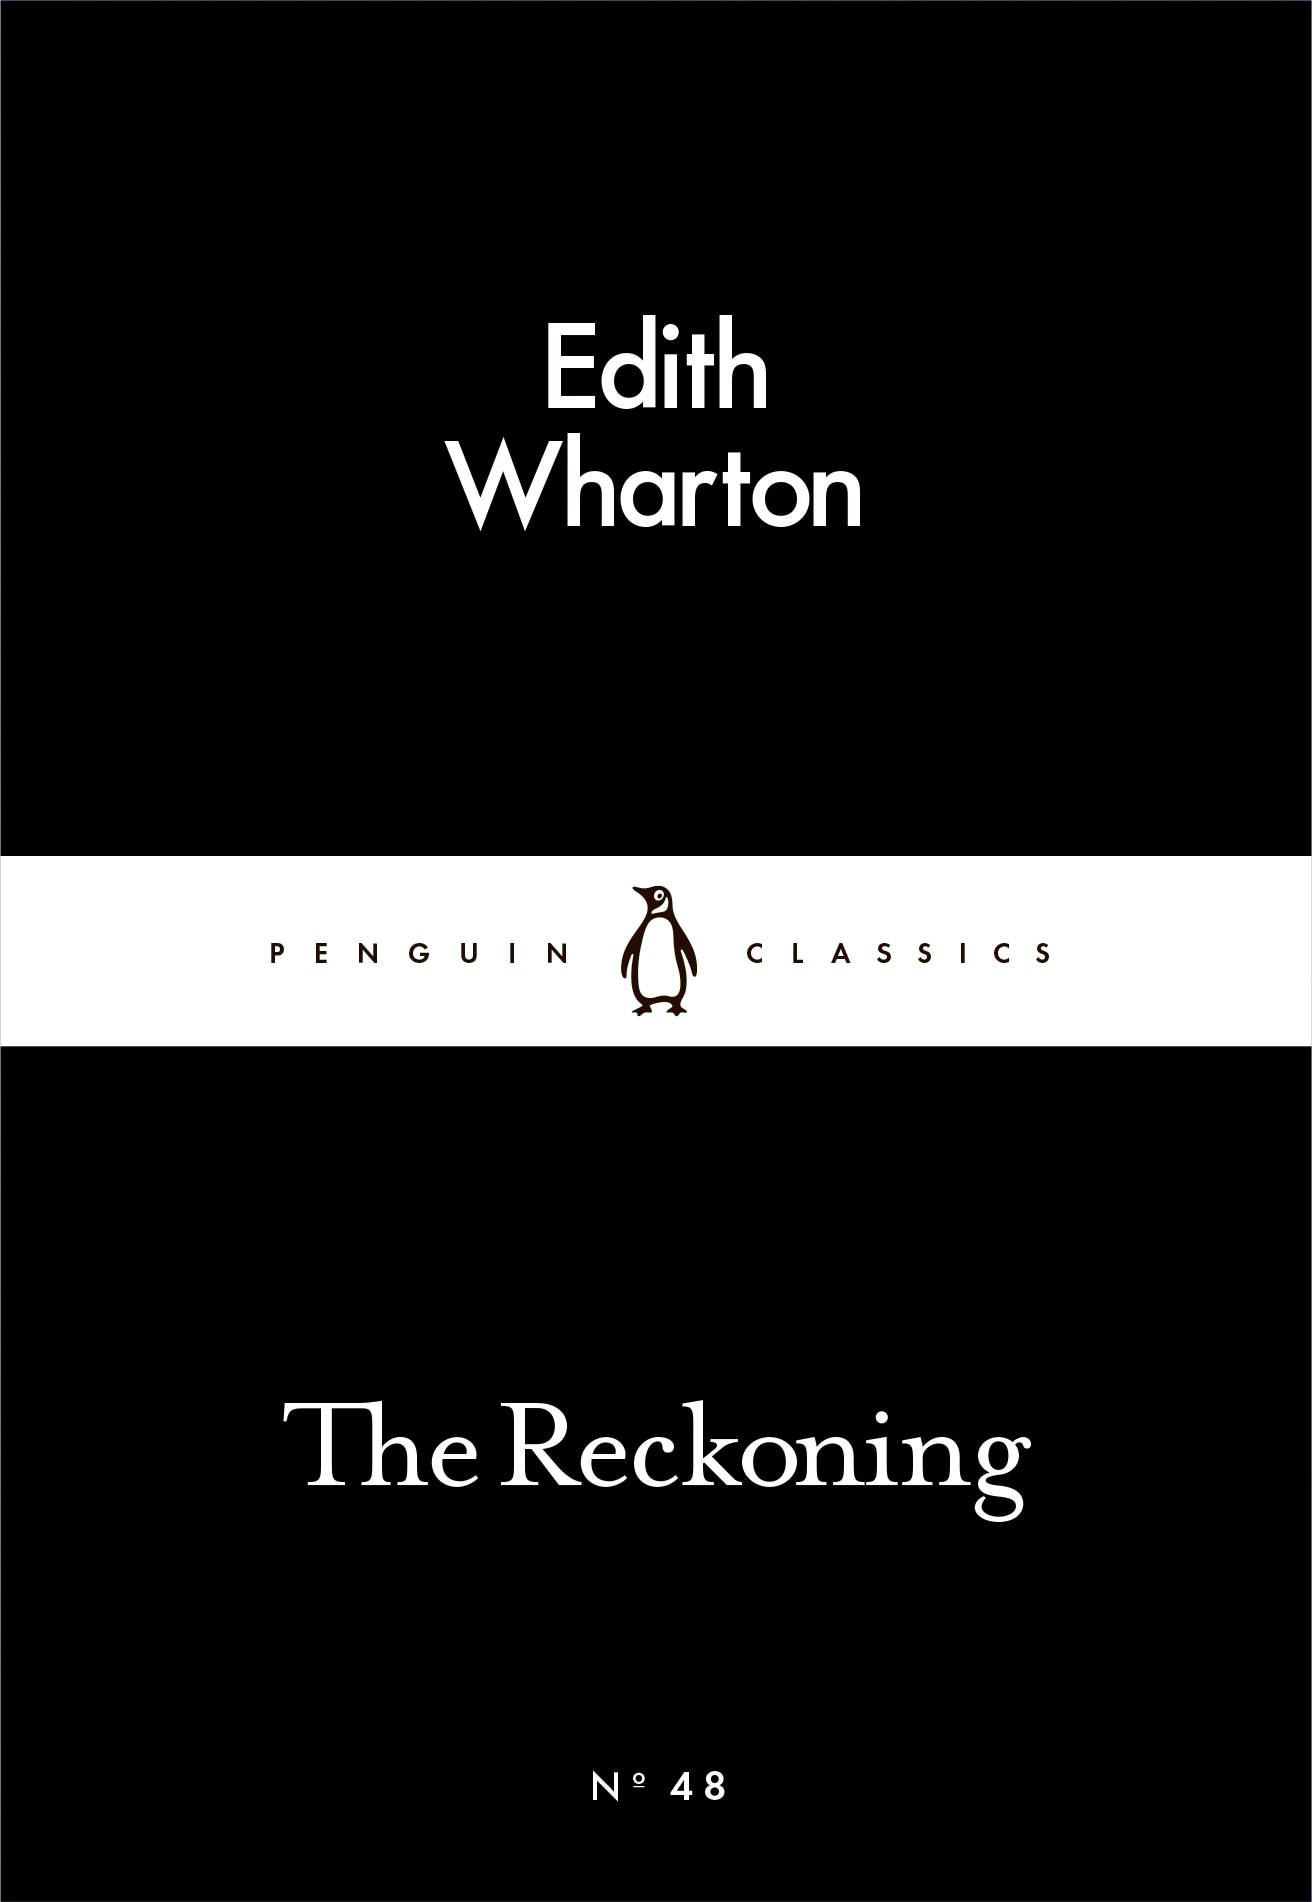 Book “The Reckoning” by Edith Wharton — February 26, 2015